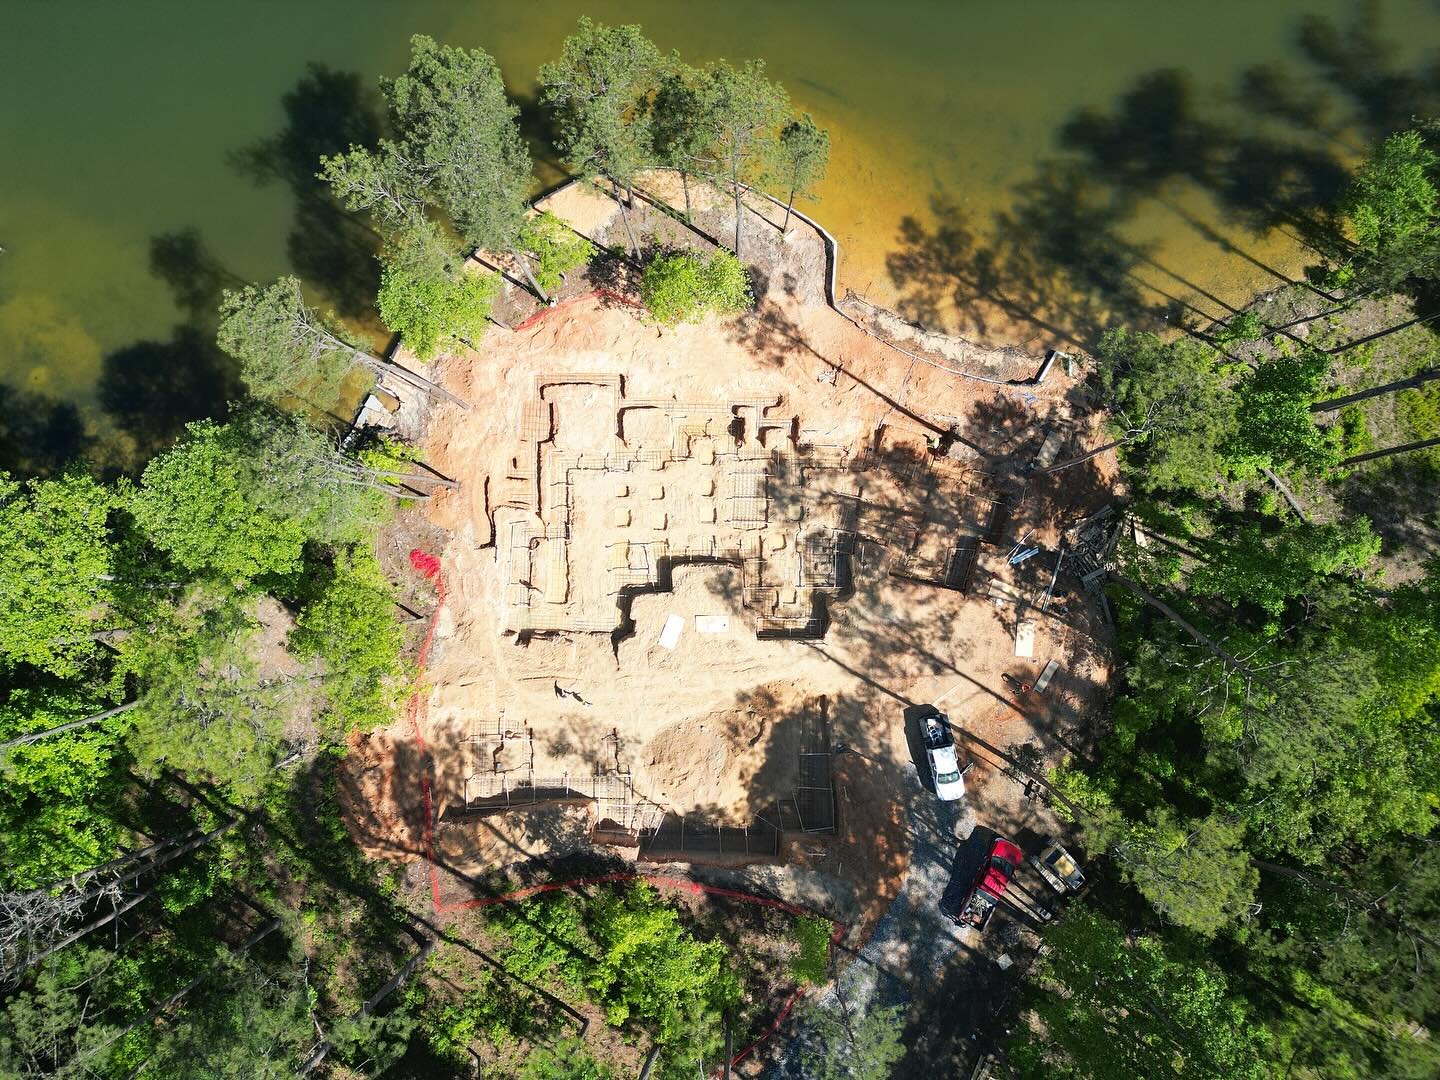 Progress on Lake Martin. The first of a few projects we have ongoing in The Heritage has broken ground with @tcc_contractors and is cruising right along. 
.
.
.
#architect #residentialdesign #lake #sitevisit #design #lakehouse #birdseyeview #lakemart